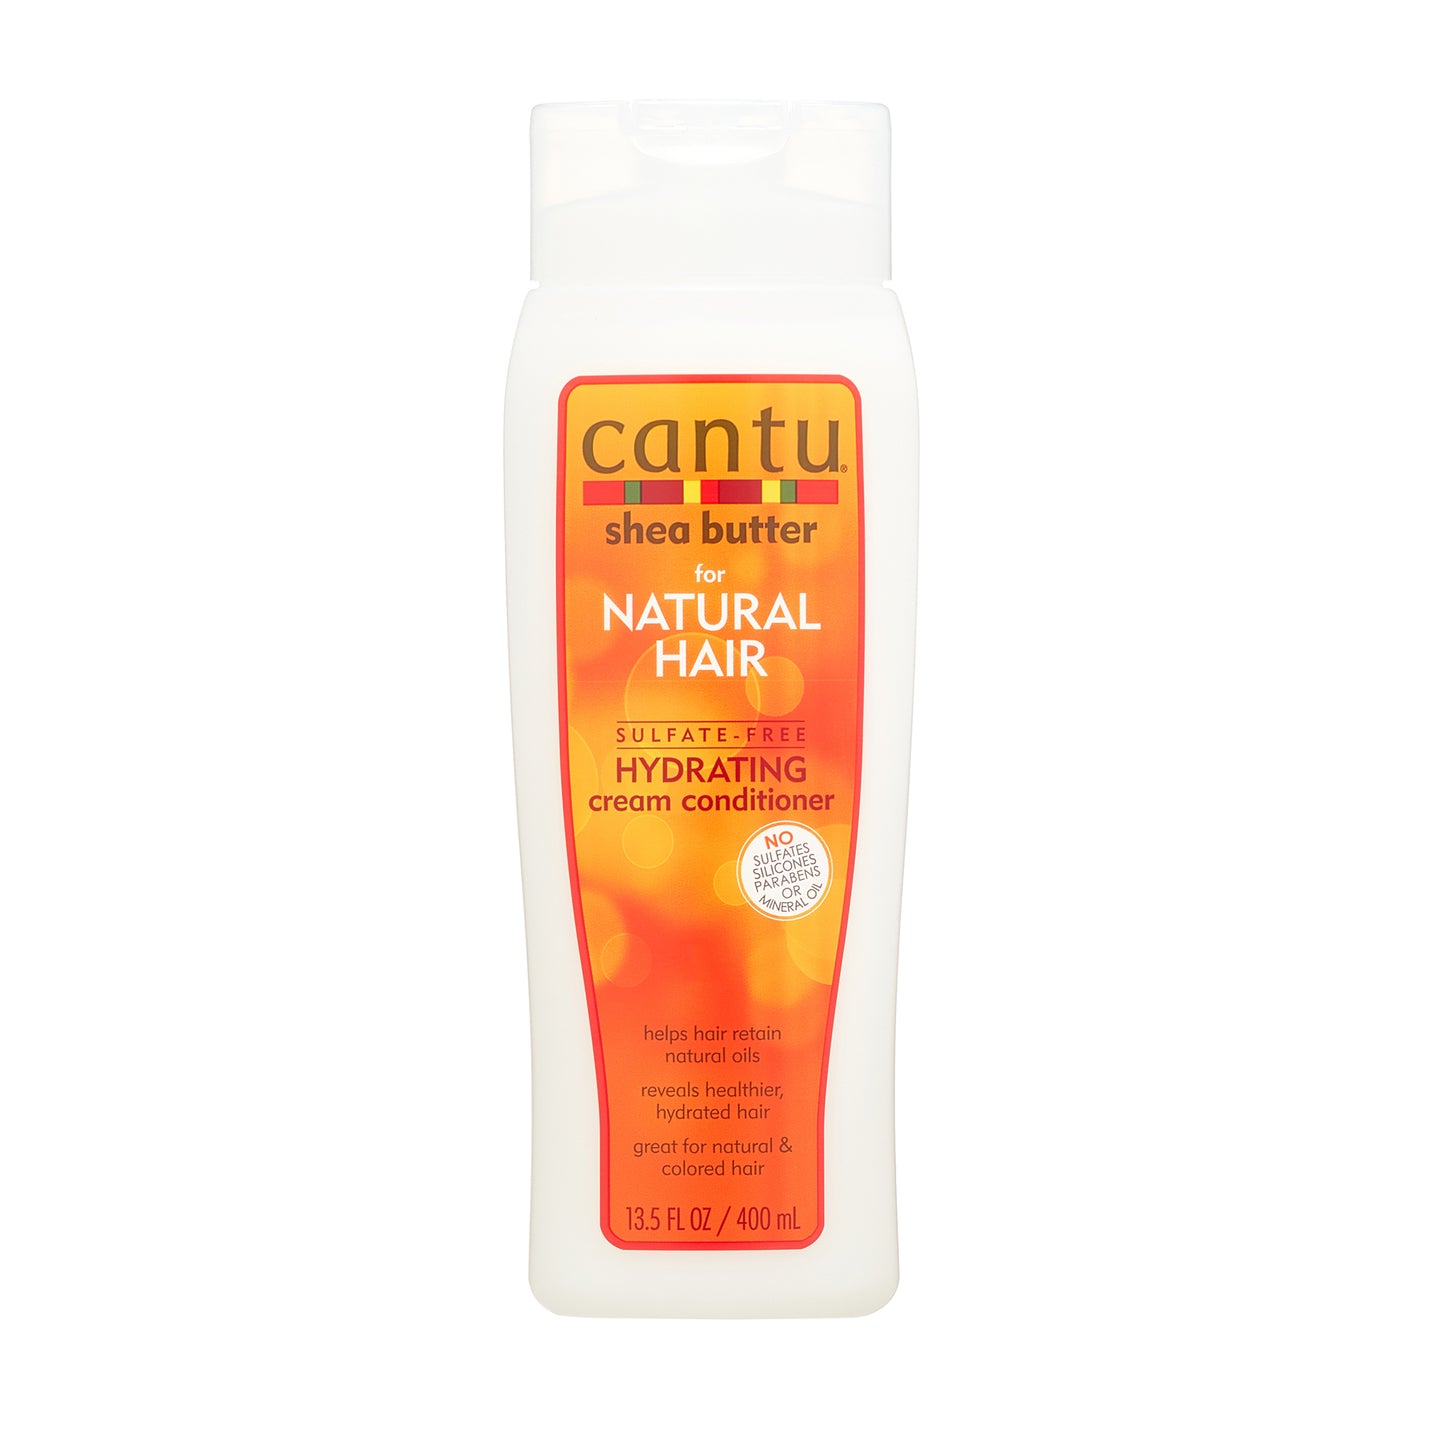 CANTU - SHEA BUTTER FOR NATURAL HAIR SULFATE-FREE HYDRATING CREAM CONDITIONER - 400ML